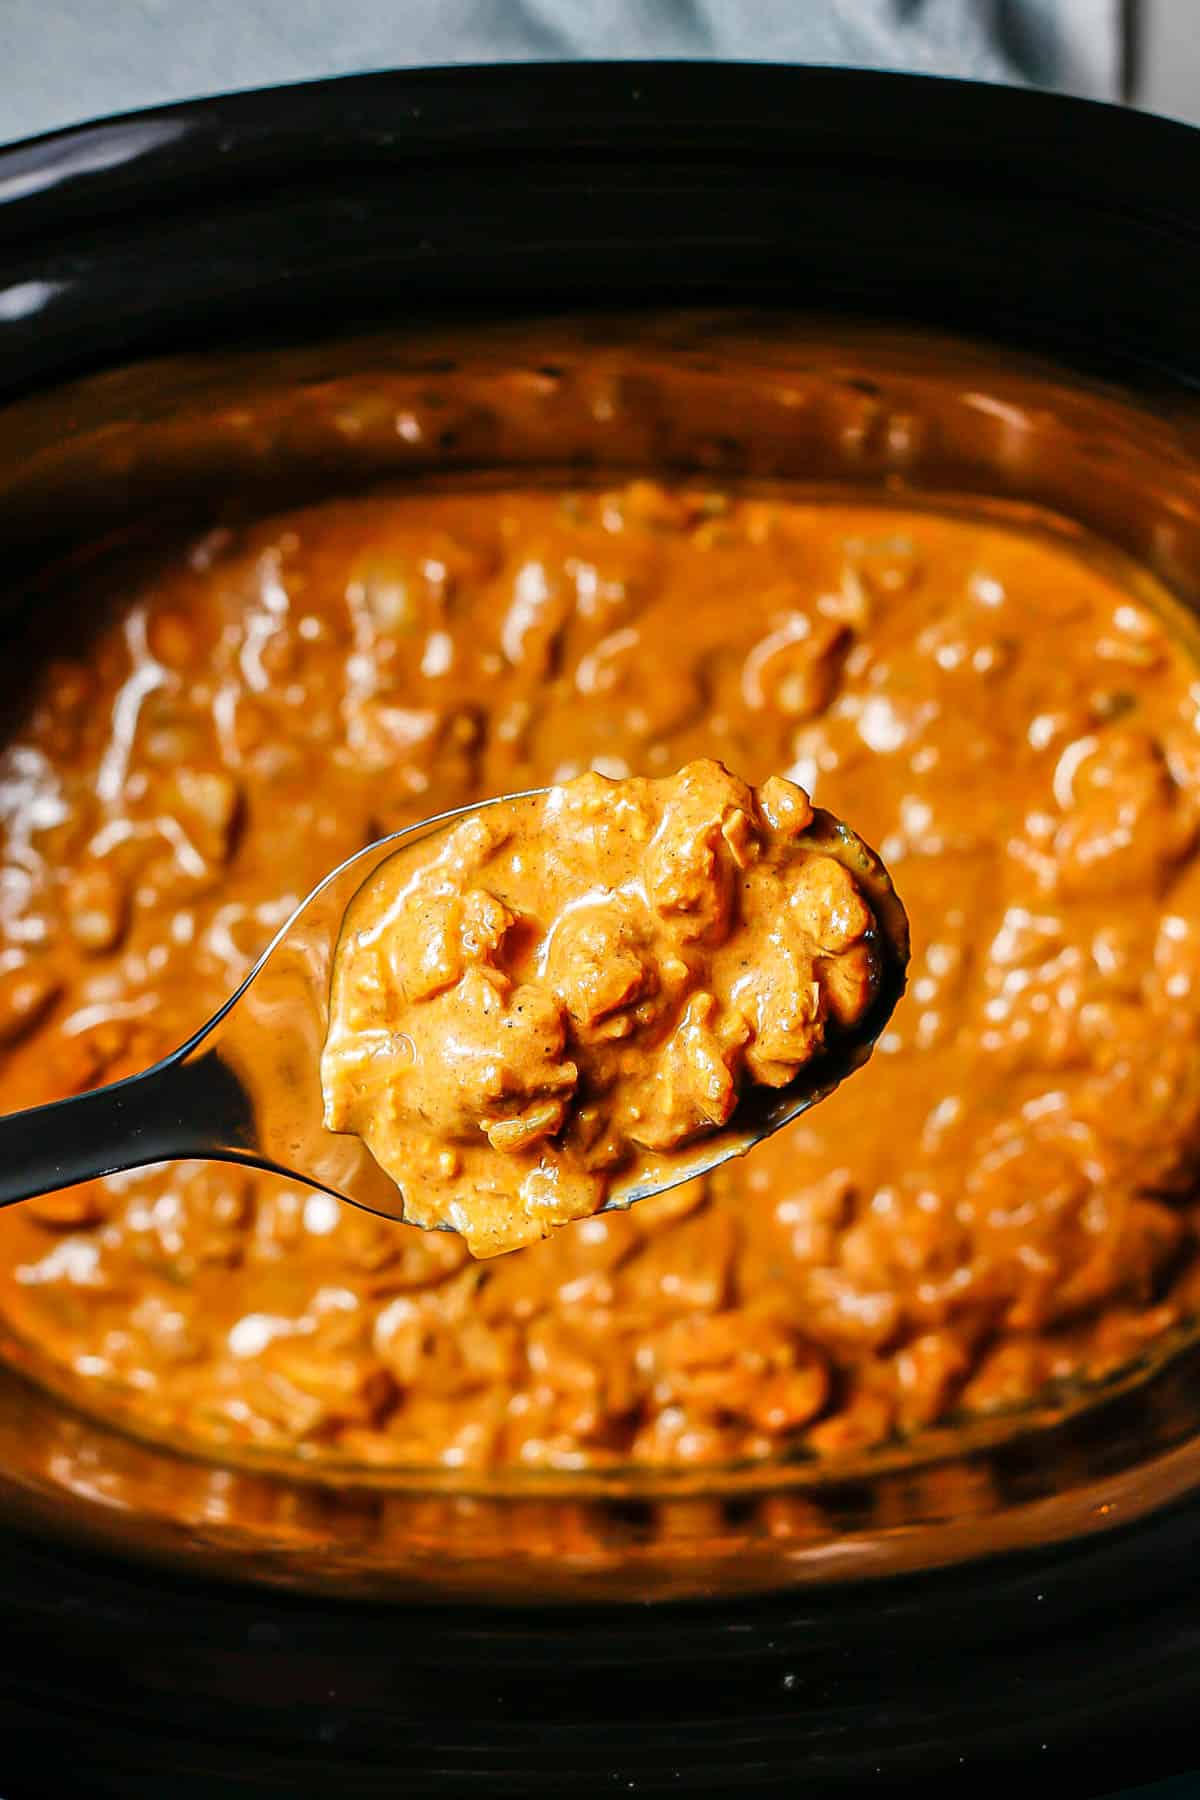 A spoon holding up a scoop of butter chicken from a slow cooker.